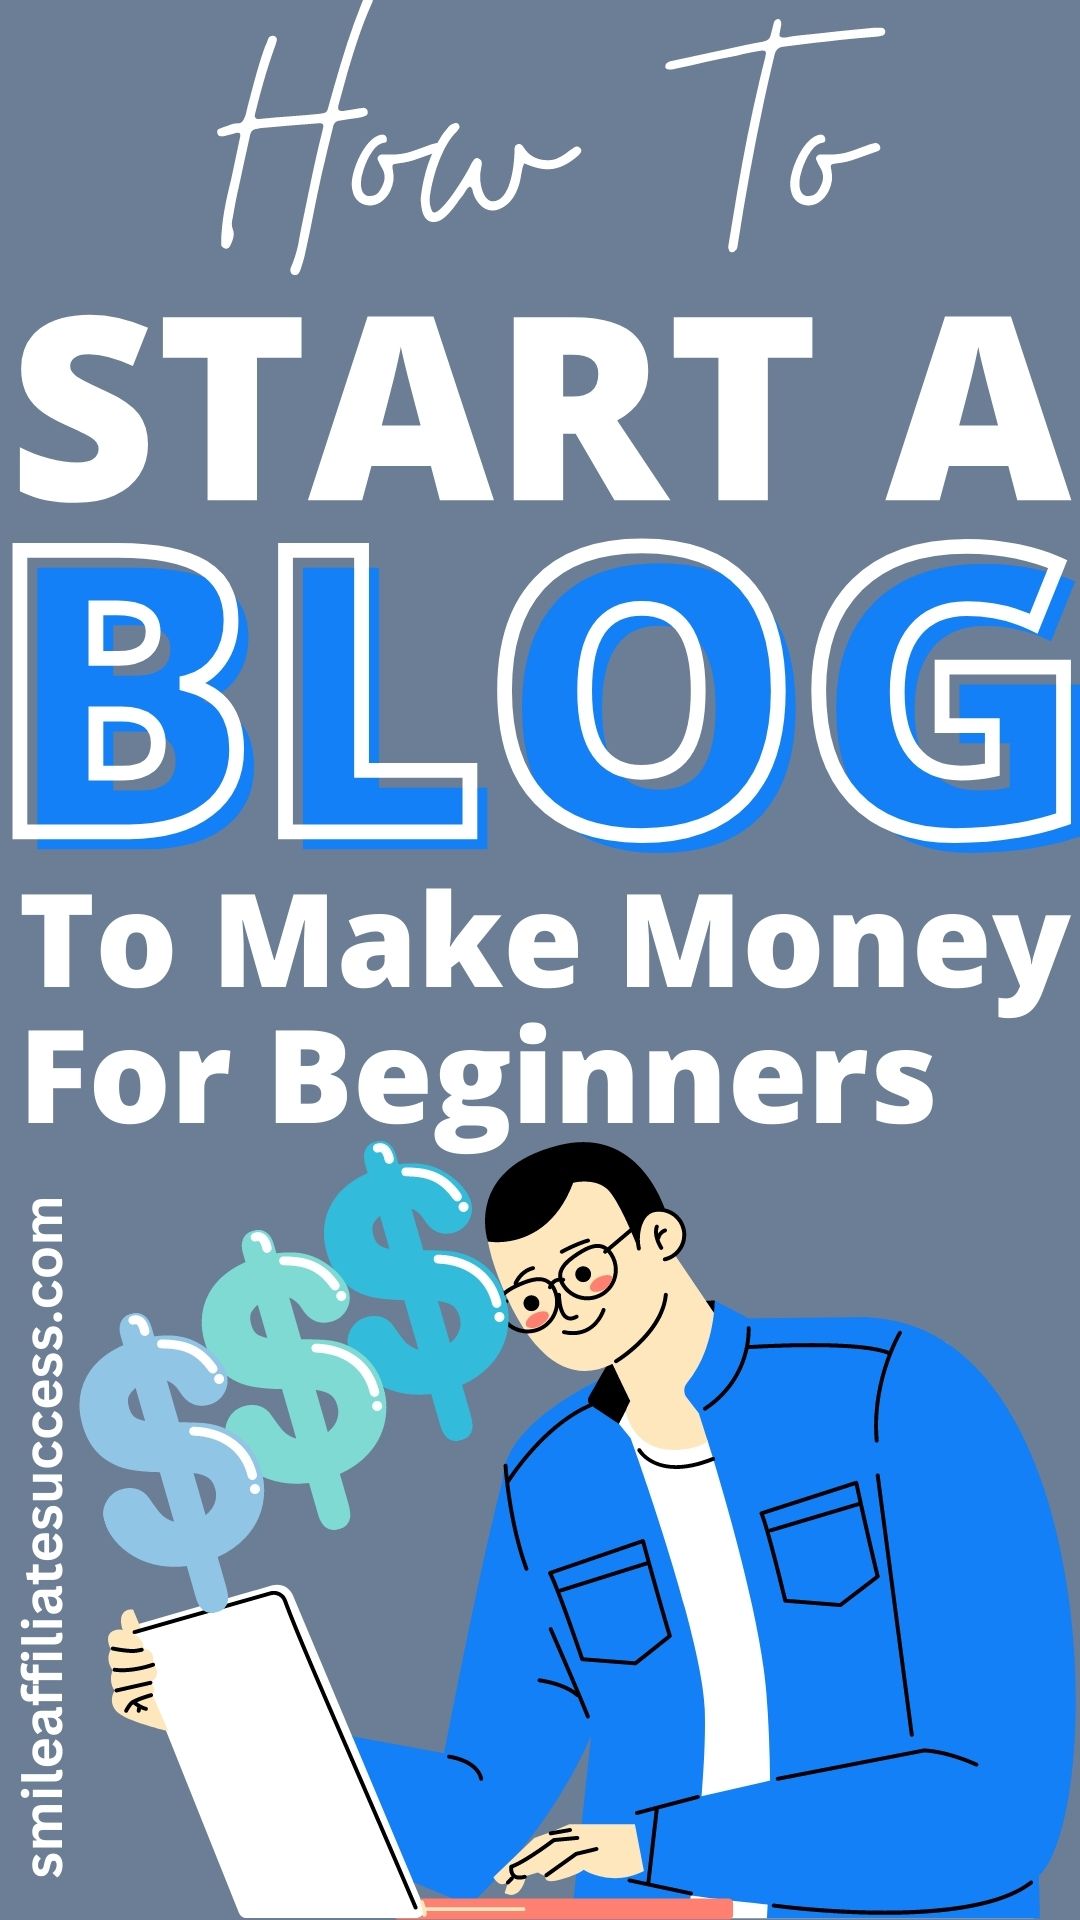 How To Start A Blog - A Step-By-Step Tutorial For Beginners!